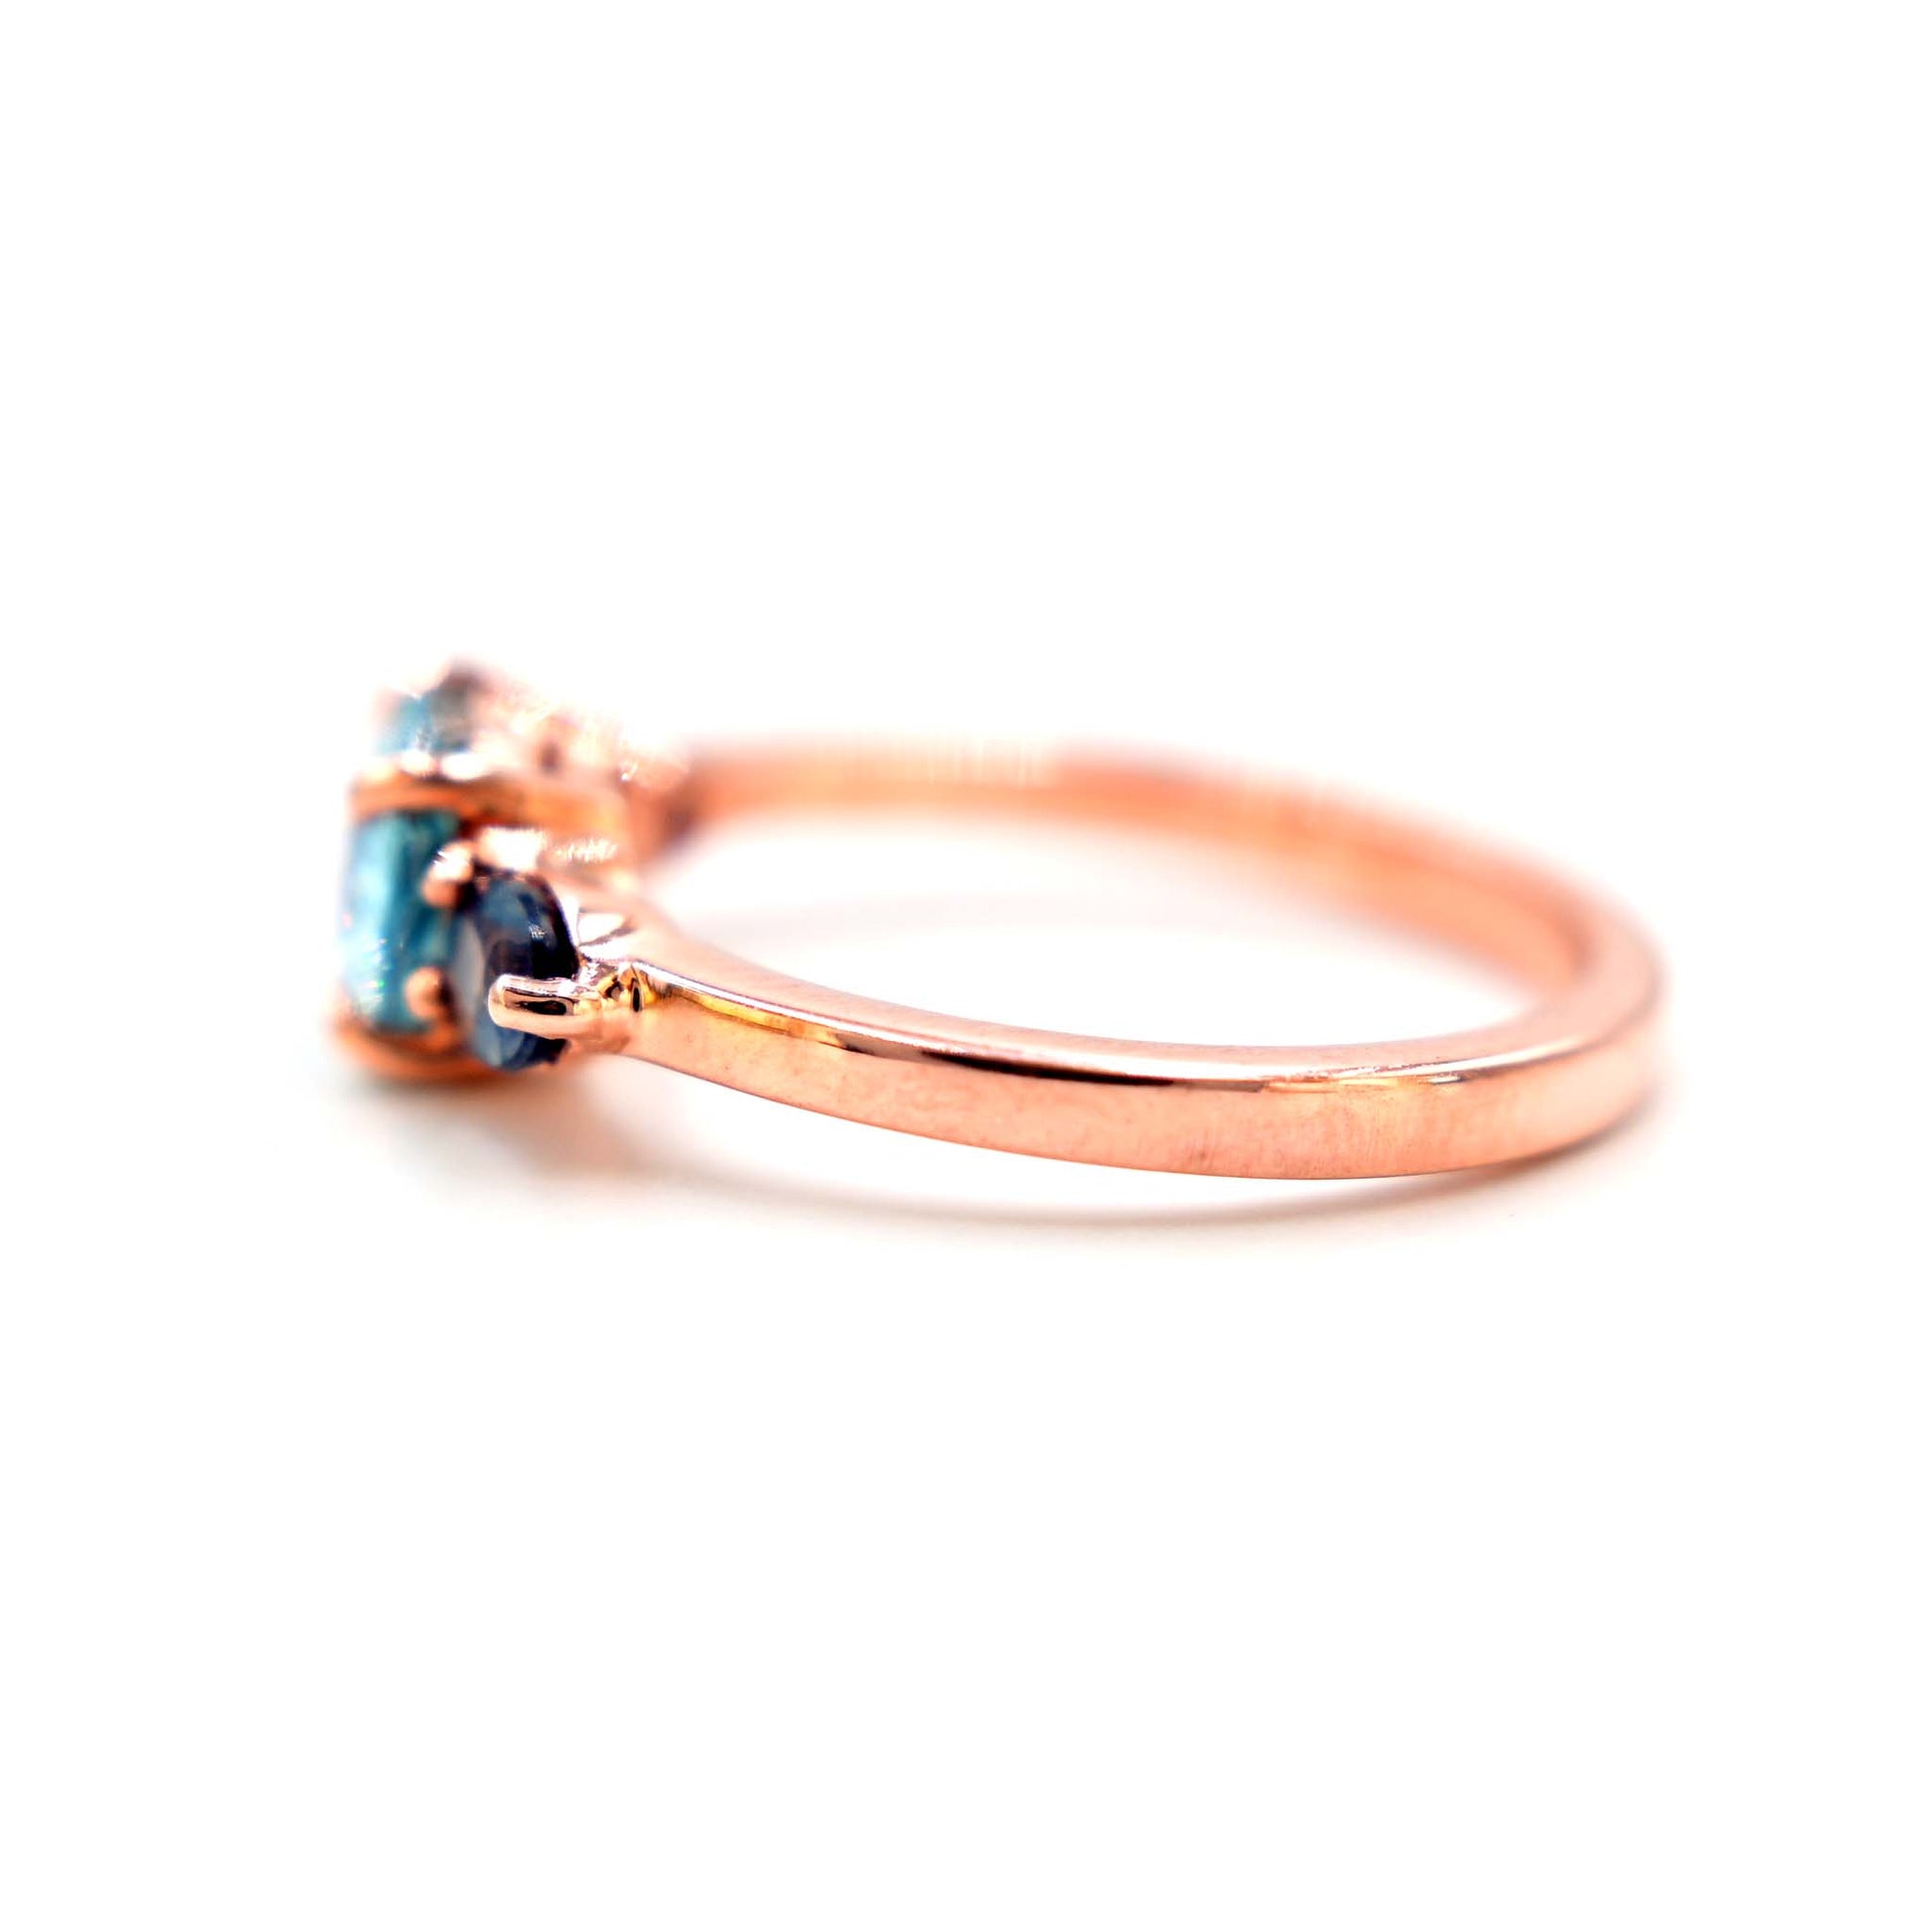 Solid 14k rosegold ring with blue zircon and blue sapphires. Handmade in Chiang Mai, Thailand